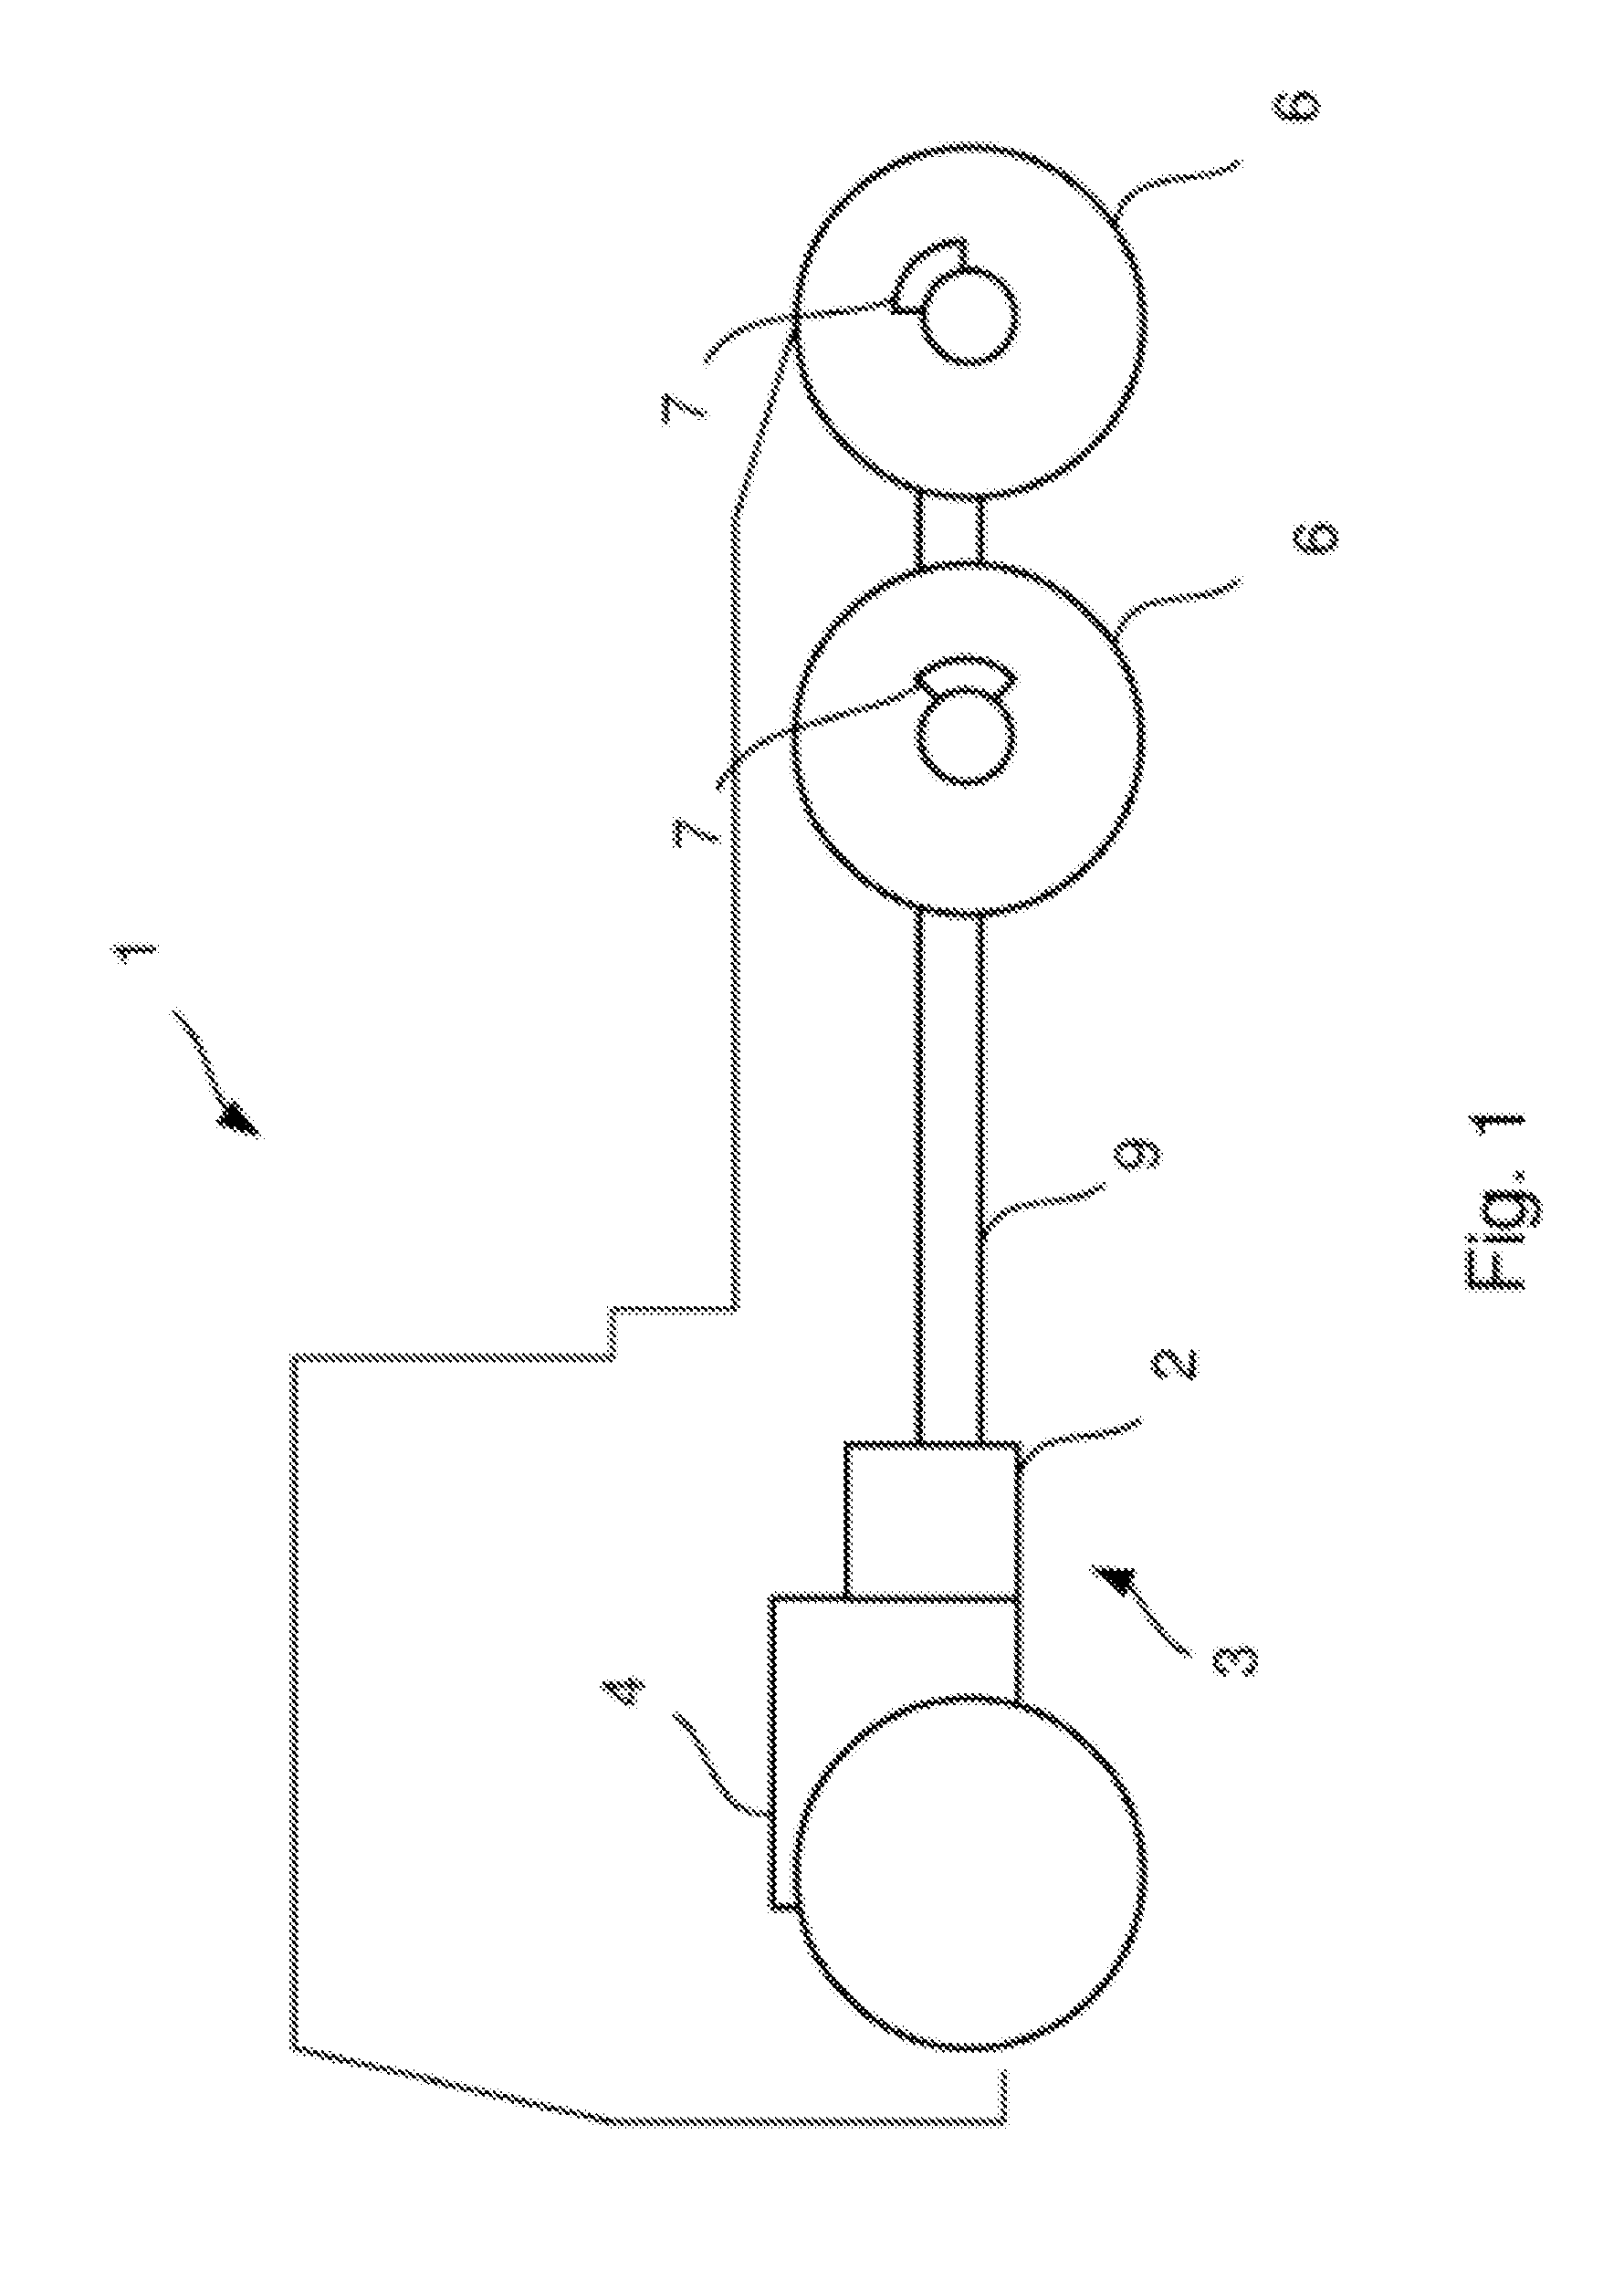 Method for controlling a driveline in order to optimize fuel consumption